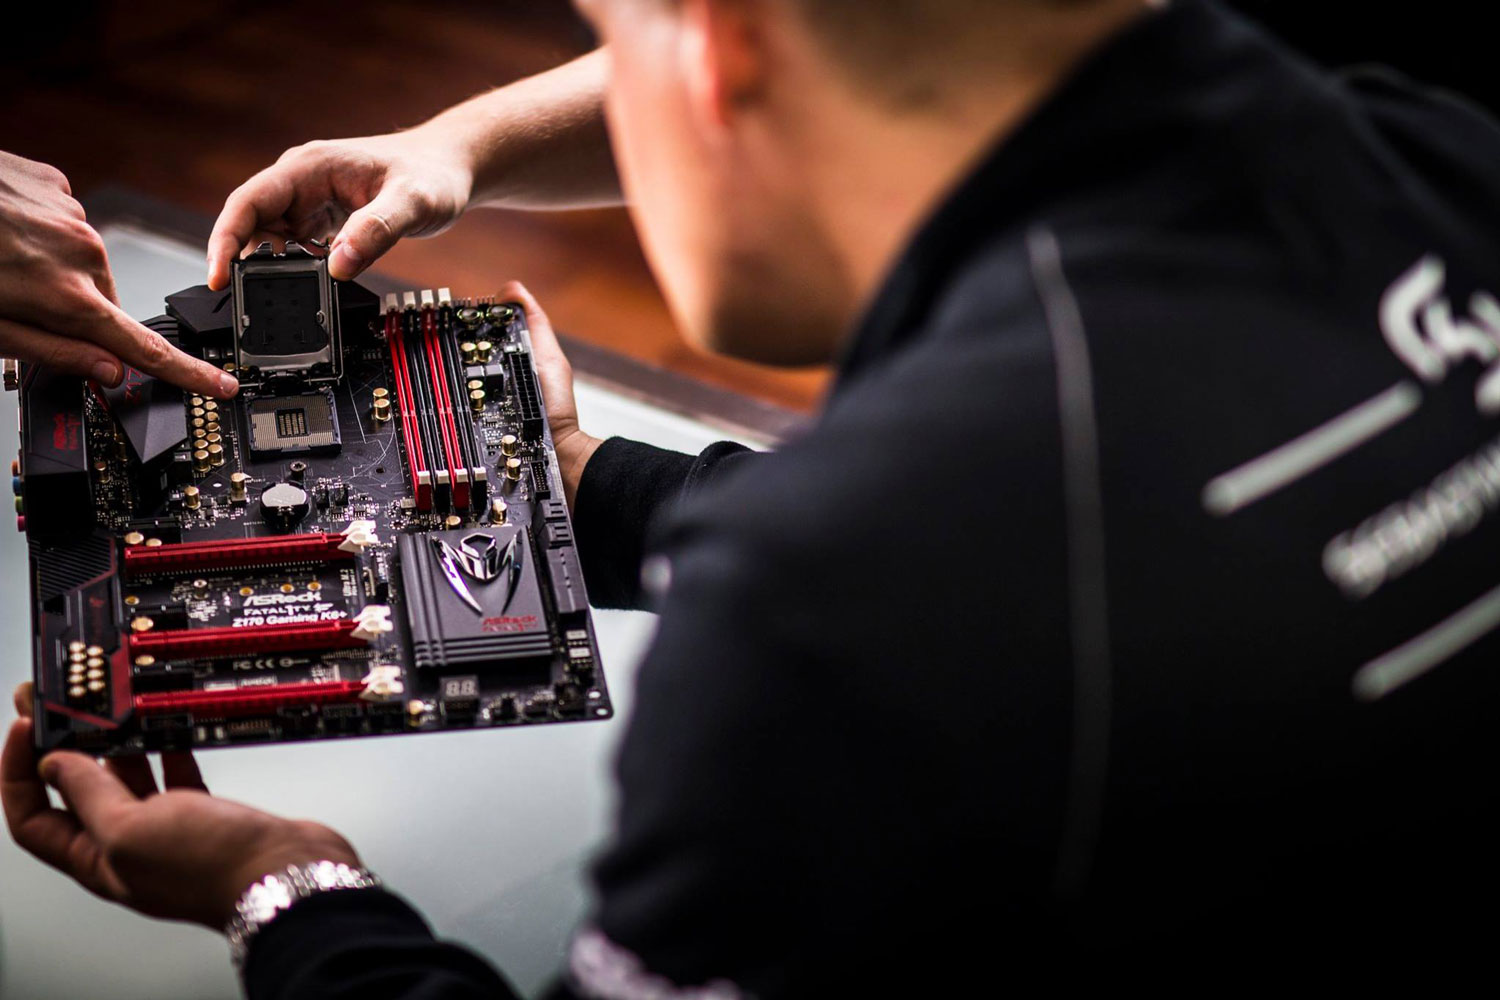 Gaming PC Advantages: Why They're Worth the Investment - U-Tech